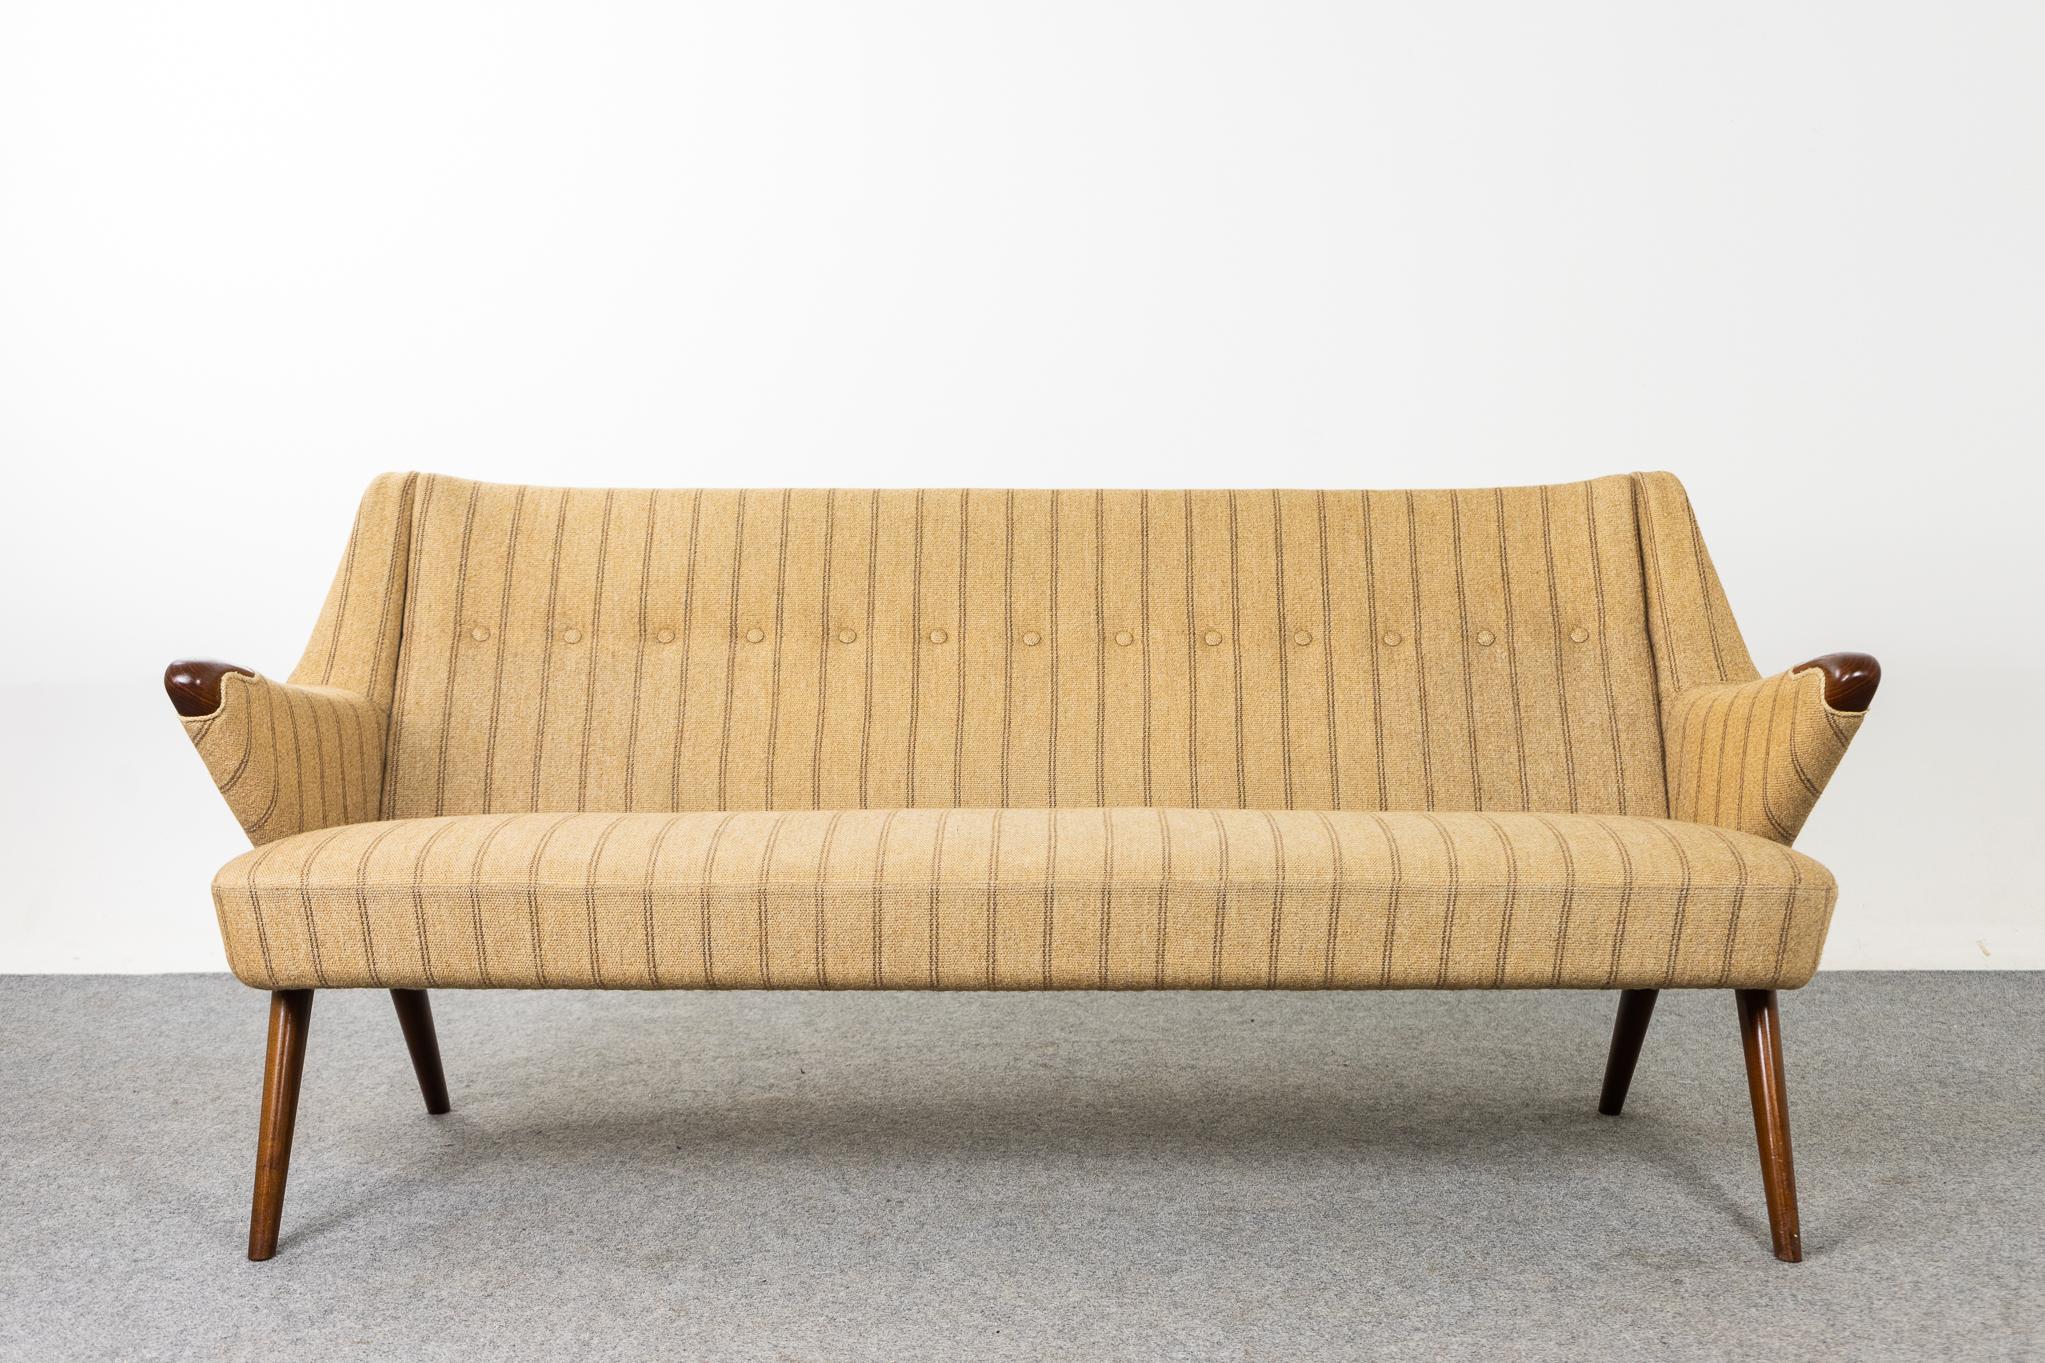 Teak and wool Danish modern sofa, circa 1960's. Stunning three seat sofa with elegant lines and thoughtfully designed details. Compact footprint make this the perfect seating solution for urban dwellers in cozy lofts or condos. Great construction